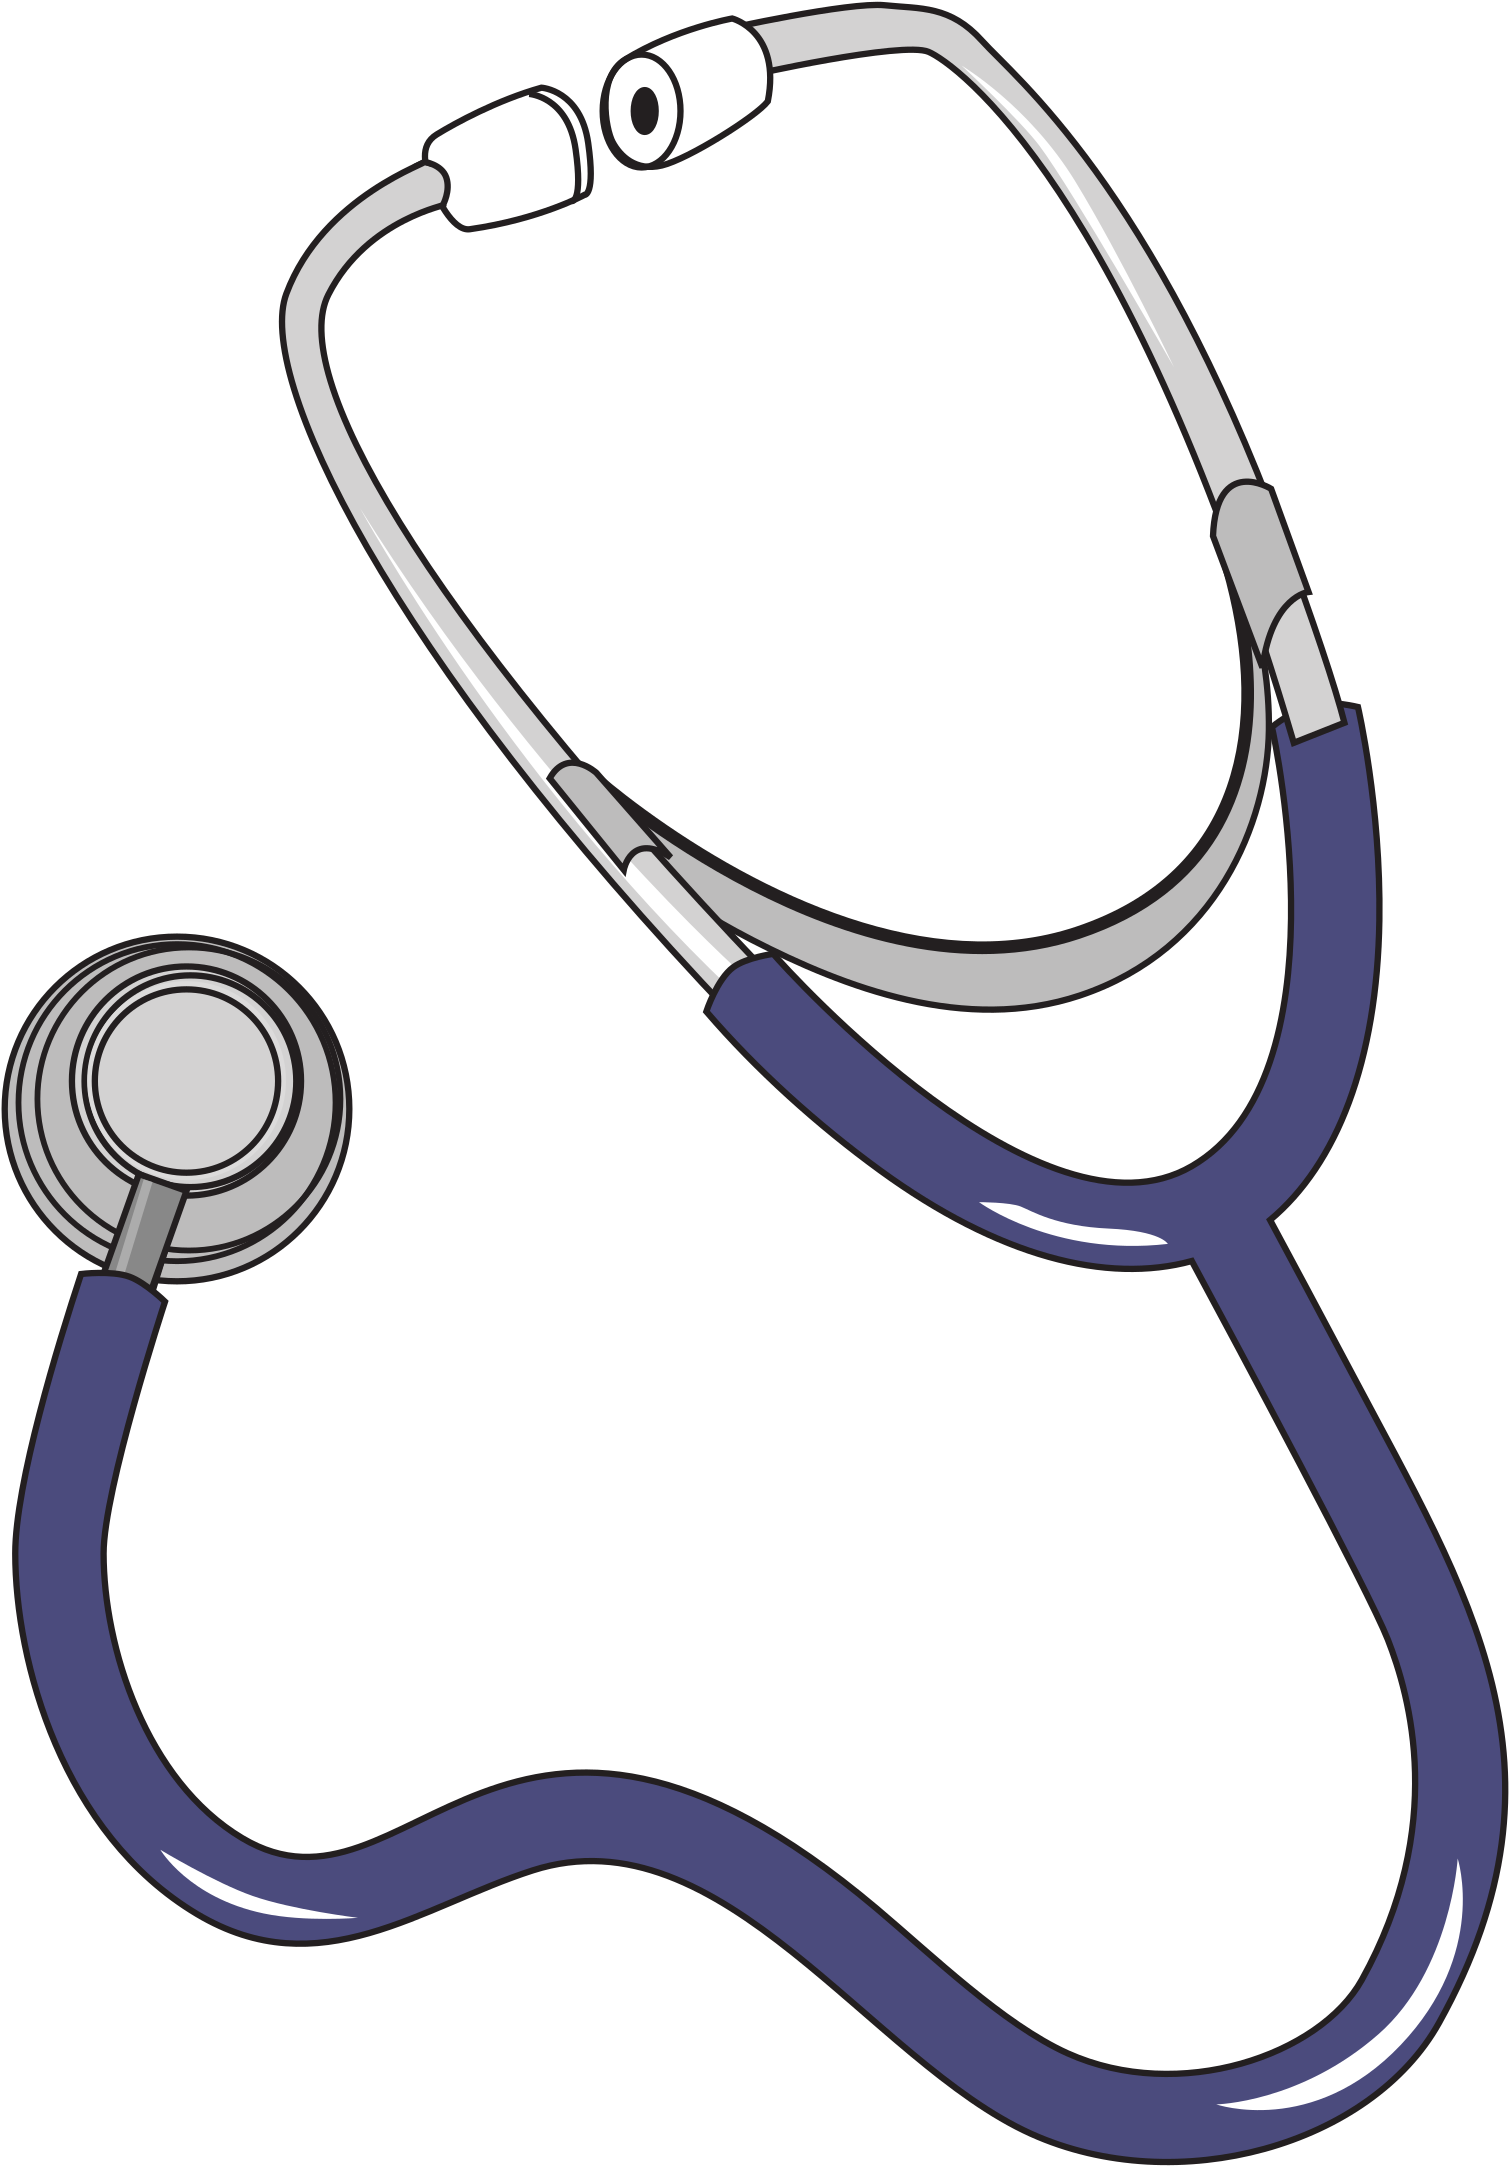 With Heart Black And Stethoscope Clip Art - Clip Art Library